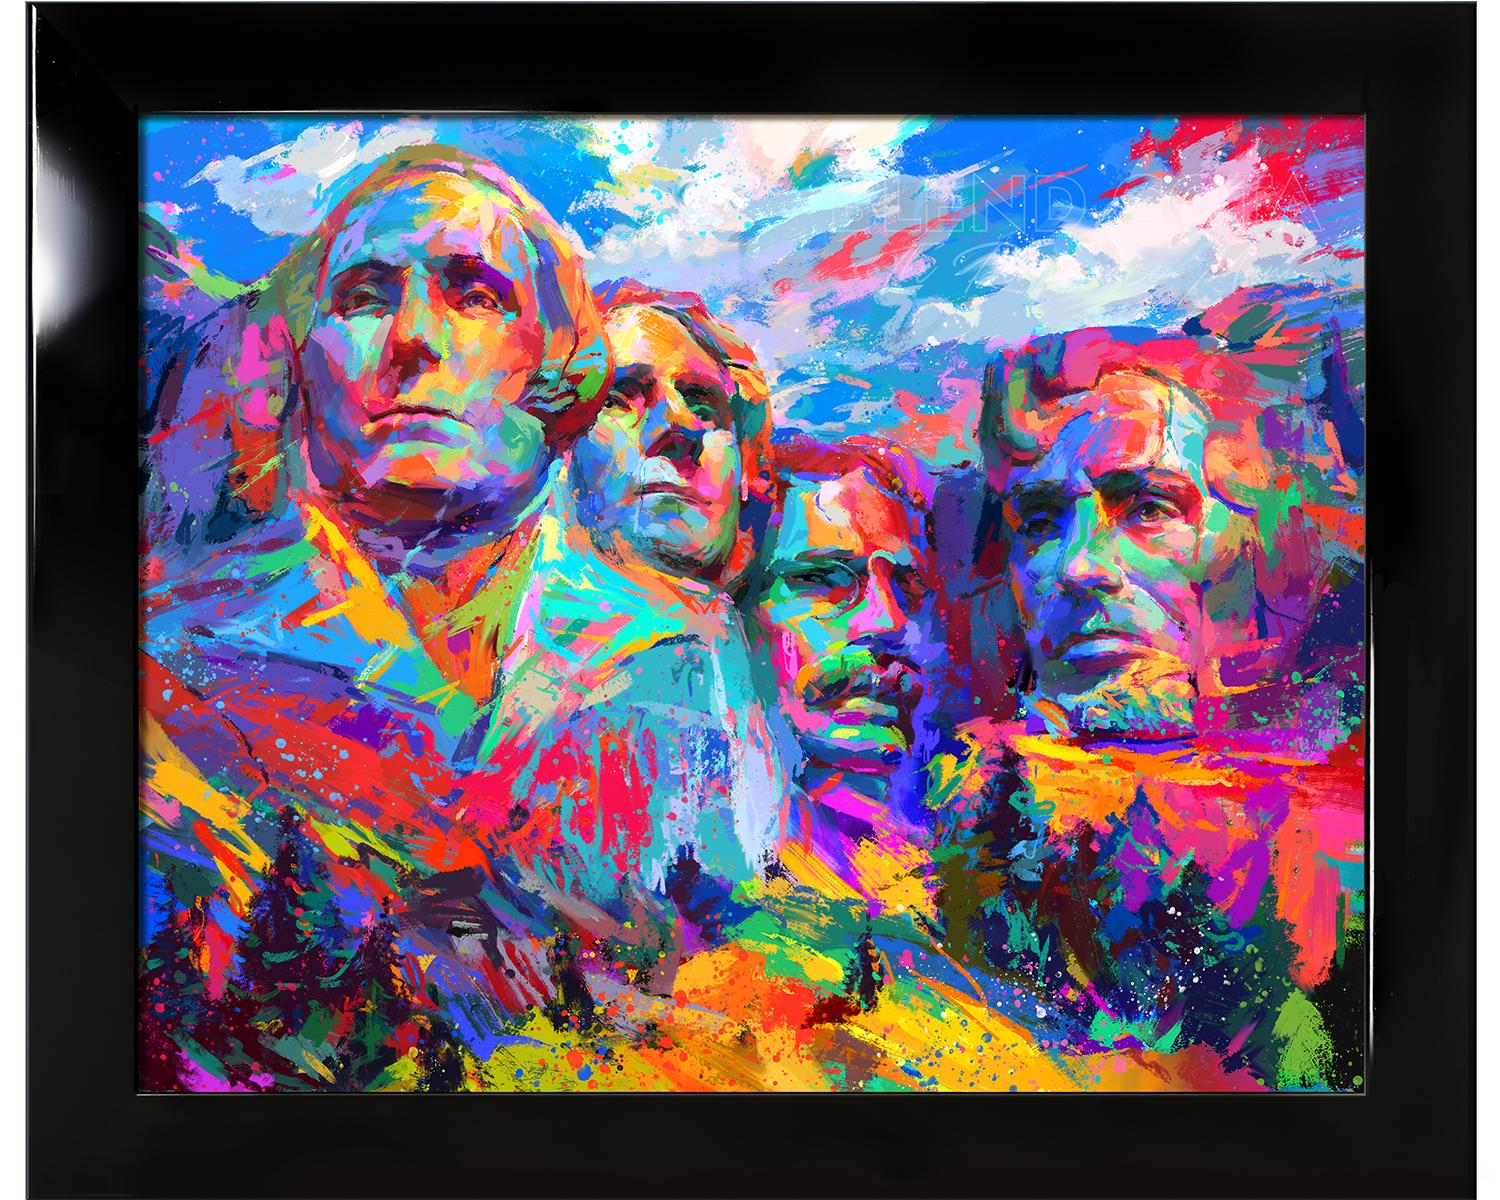 Mount Rushmore - Oil on canvas painting - Painting by Blend Cota